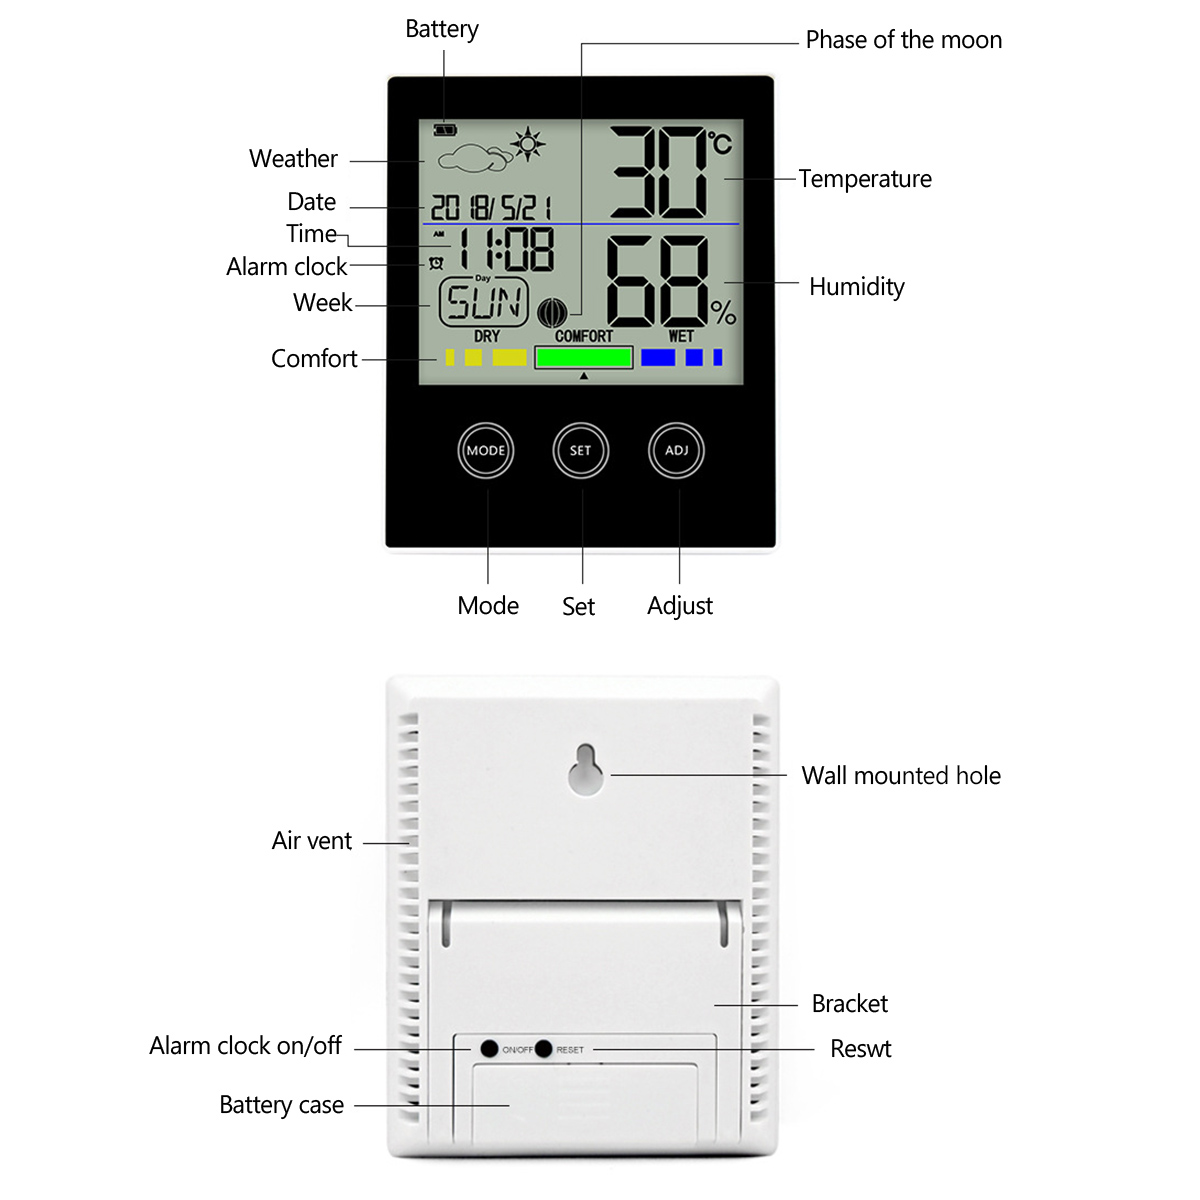 CH-909-Large-LCD-Digital-Thermometer-Hygrometer-Temperature-Humidity-Gauge-Alarm-Clock-Thermometer-1335367-9